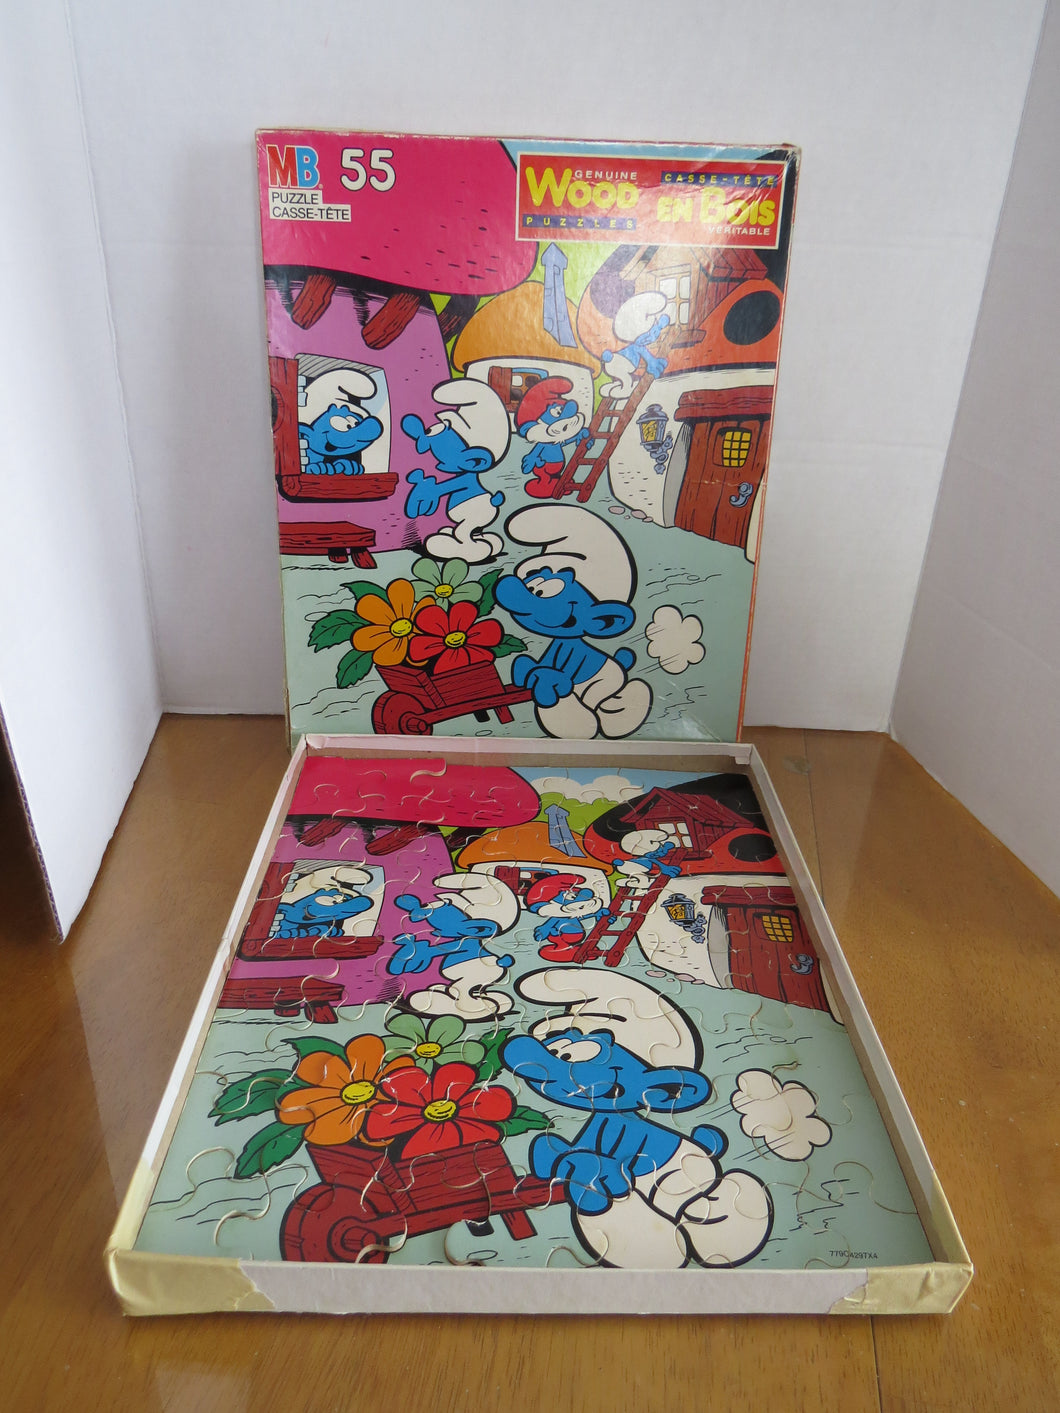 Vintage and complete THE SMURFS / SCHTROUMPFS - wooden puzzle with box - 55 mcx